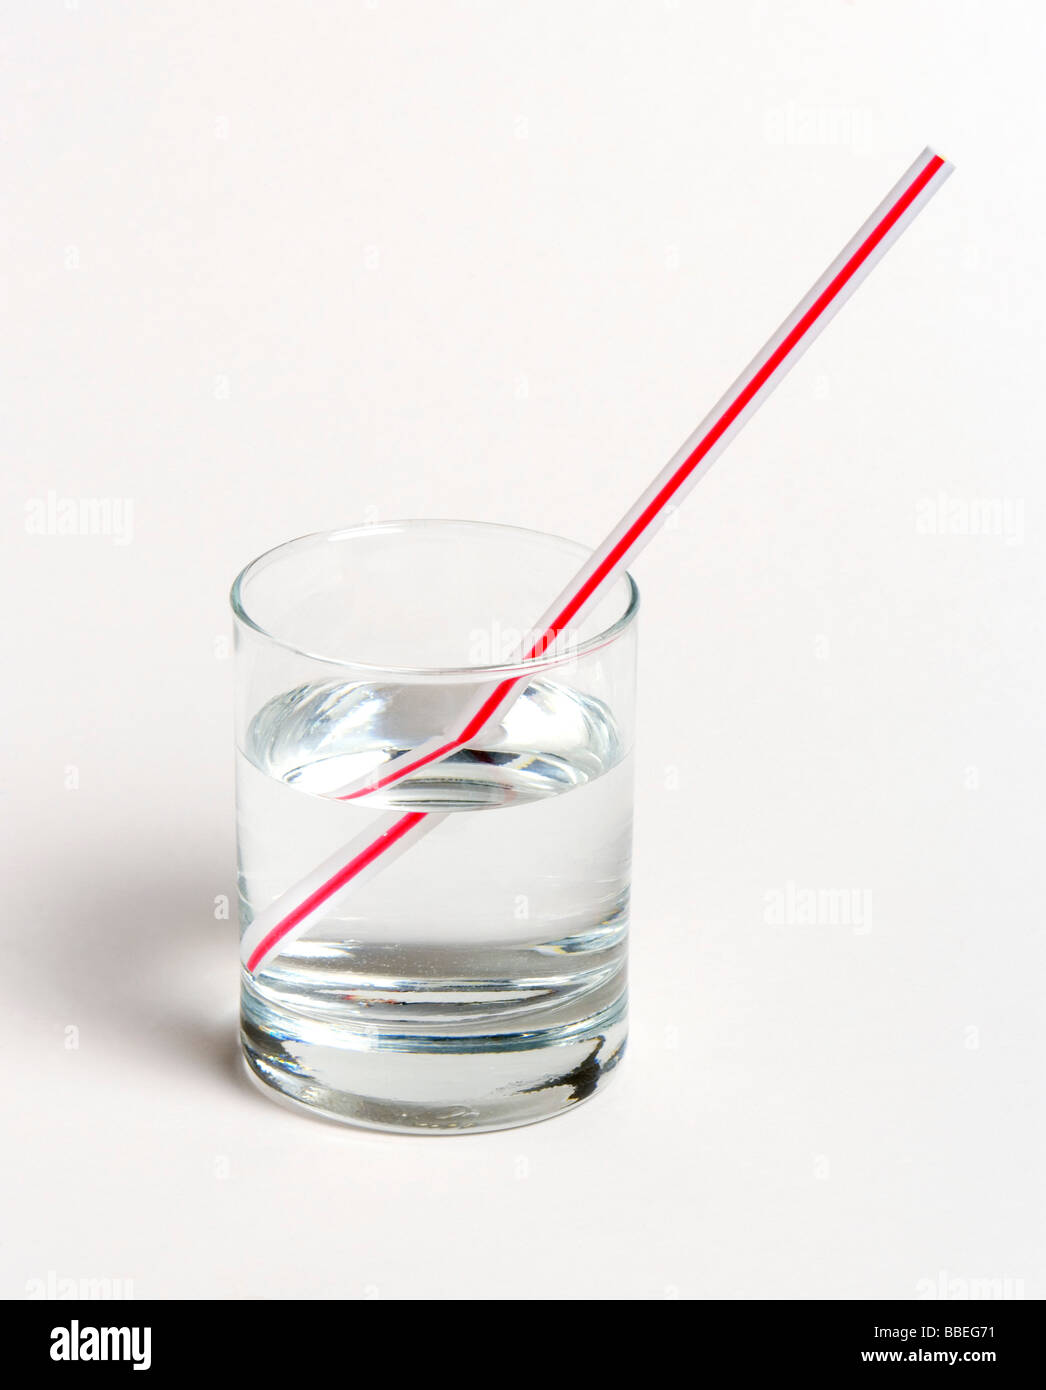 SCIENCE Optics Refraction Straw in glass of water on white background. Straw appears to be broken, due to refraction of light Stock Photo